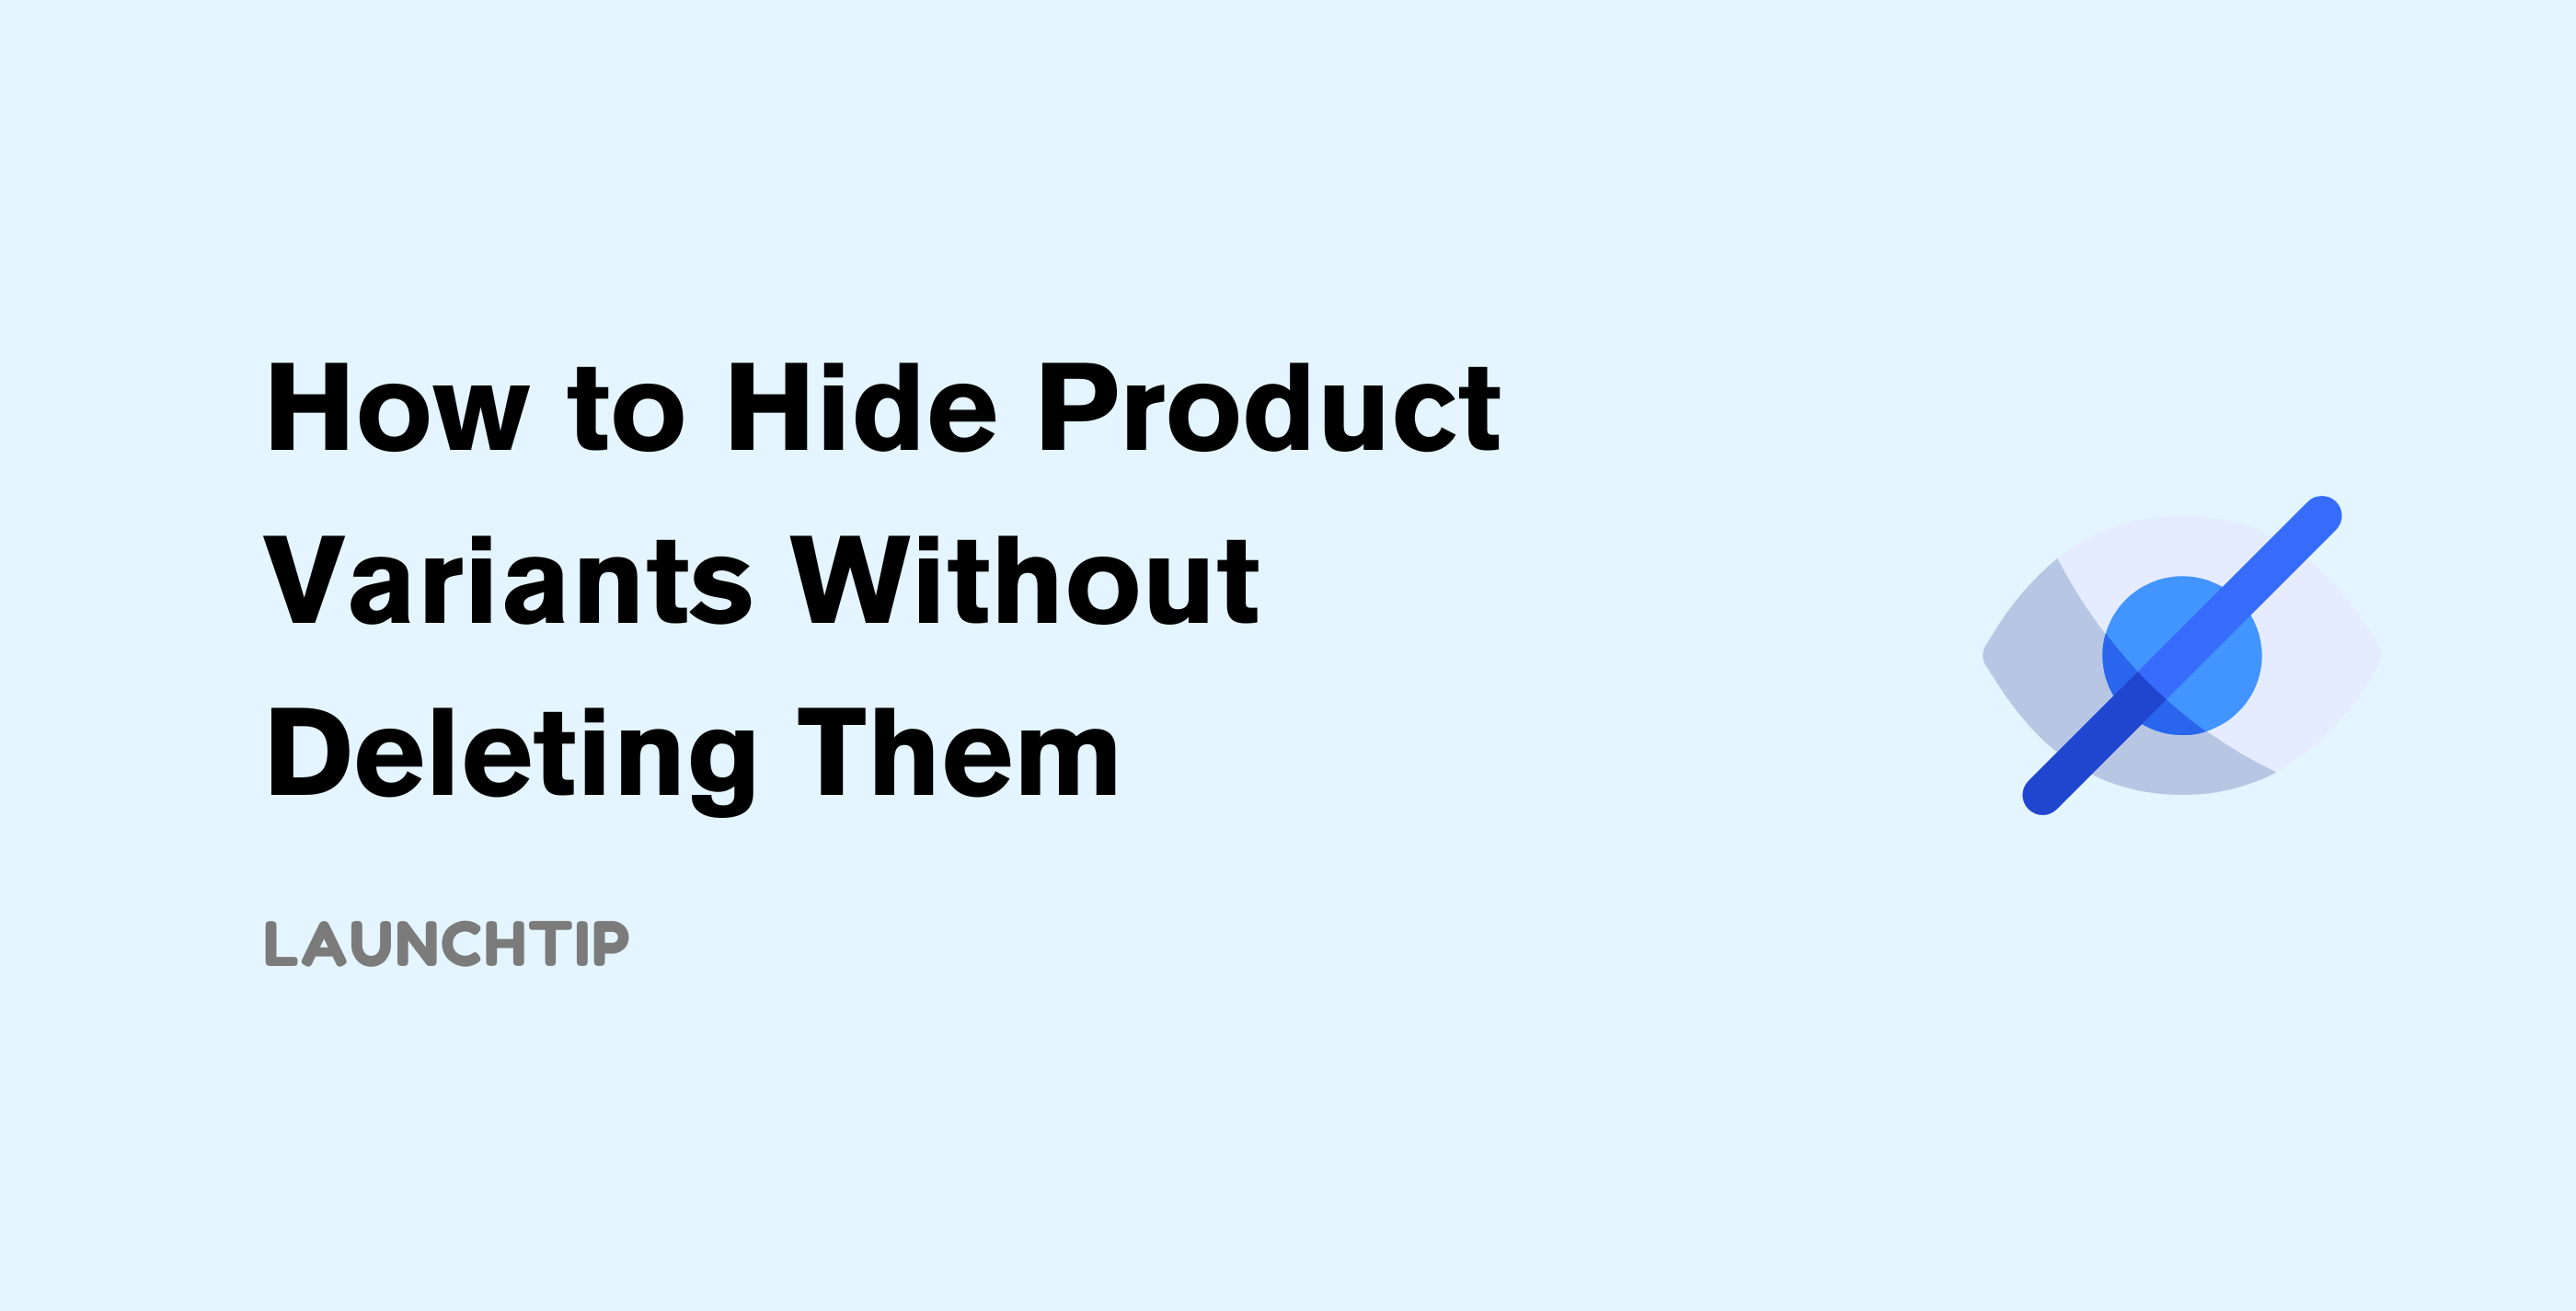 How to Hide Product Variants Without Deleting Them